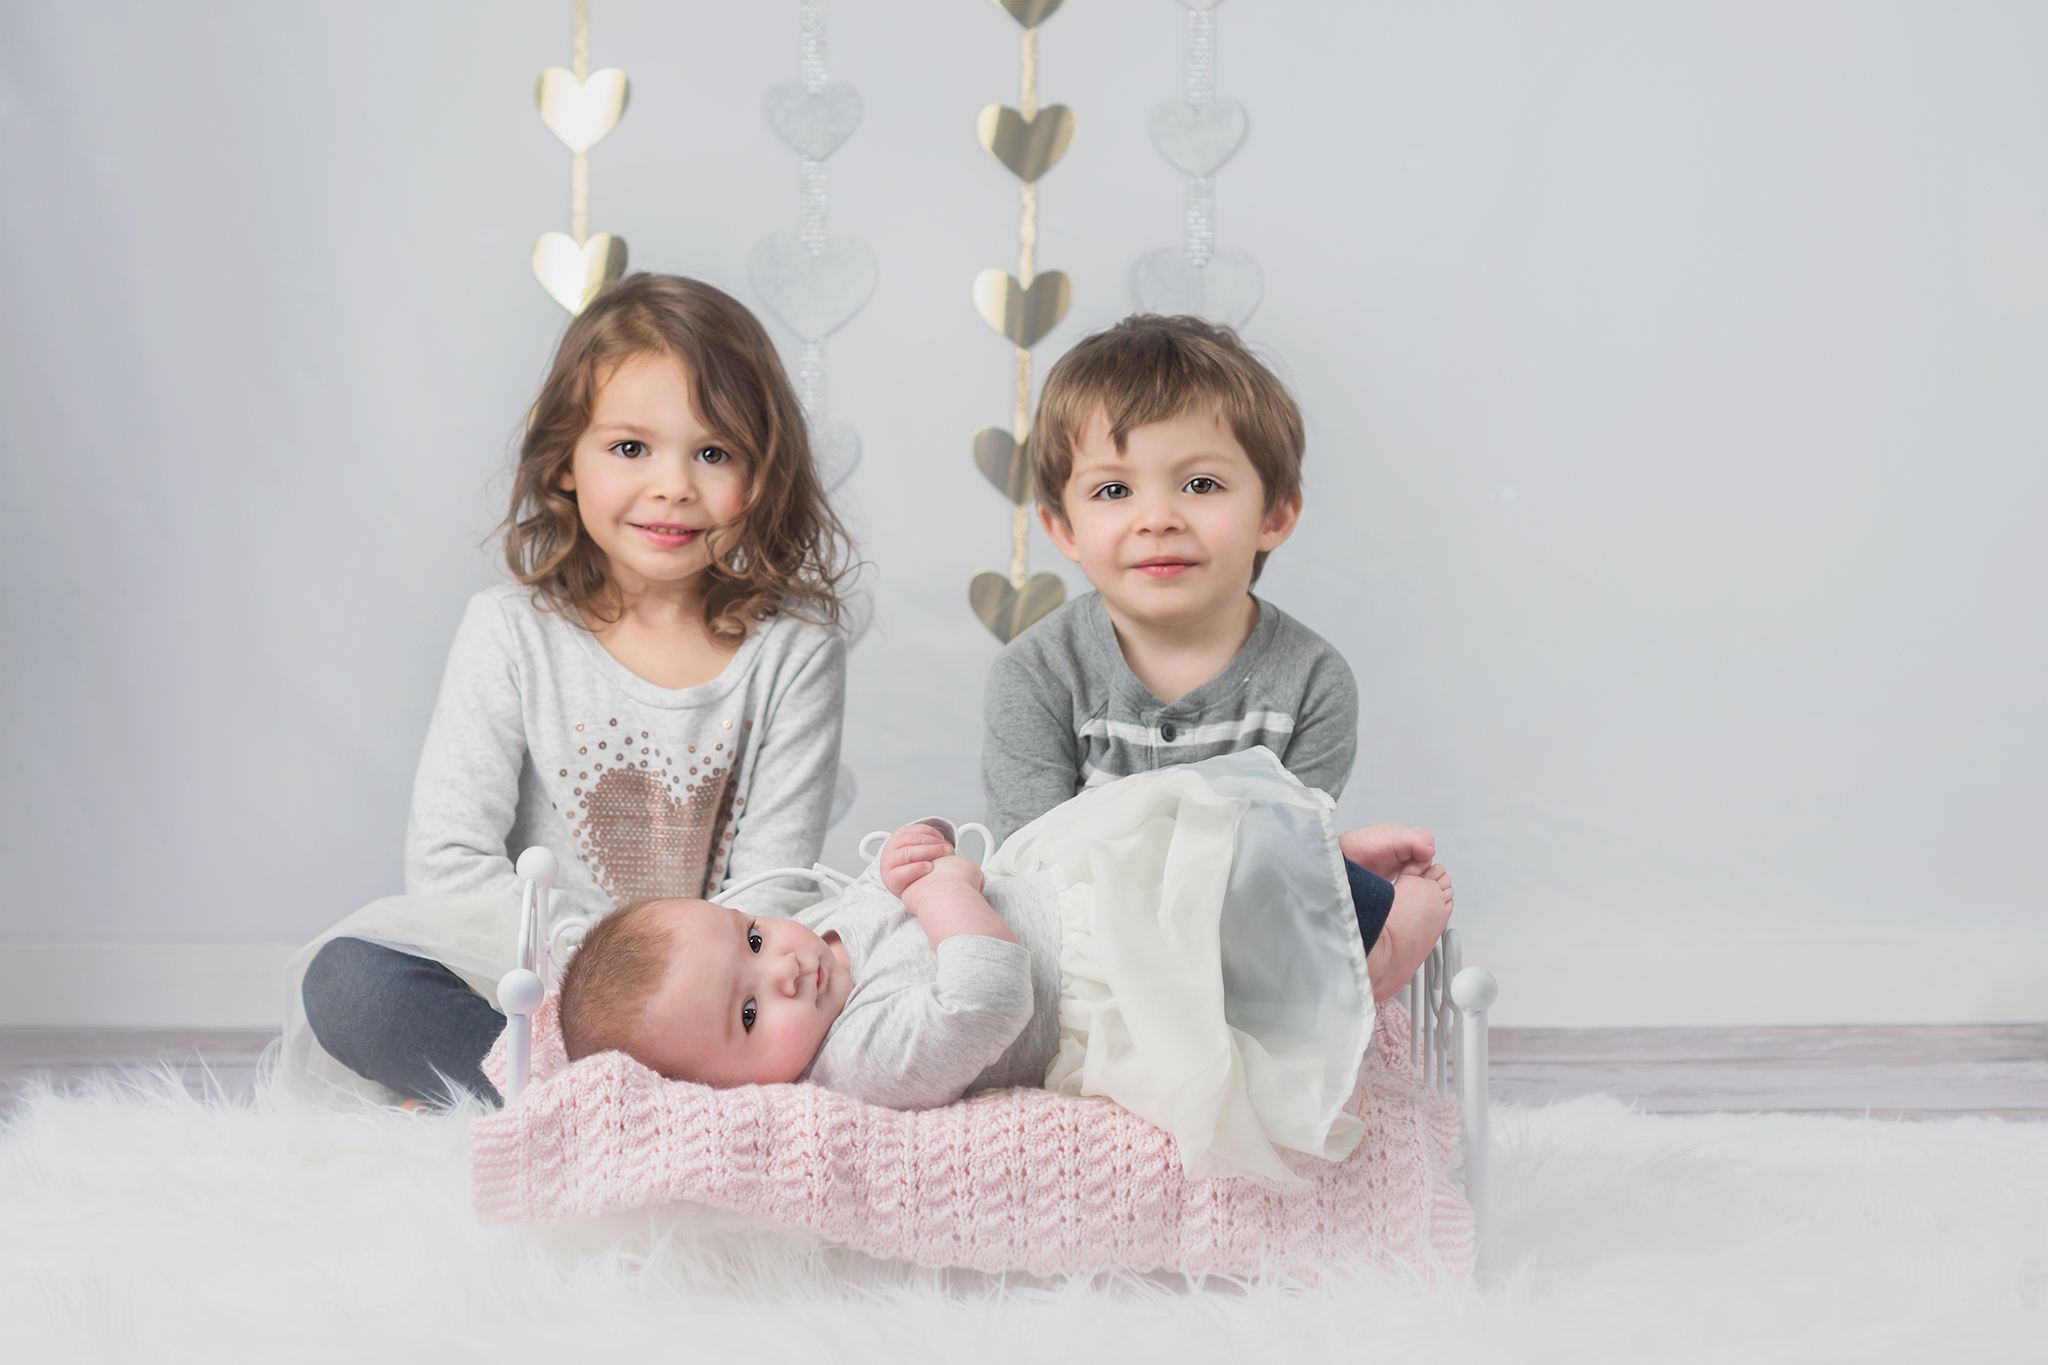 Sibling Session, Baby, Child, Family, Model, Photography, Session, Casi Ann Photography, studio, Valentine, Milestone, brother, sister, elementarty, school, preschool, 4 month, gold, silver, gray, black, white, flowers, ingleside, loves park, illinois, portrait, kids